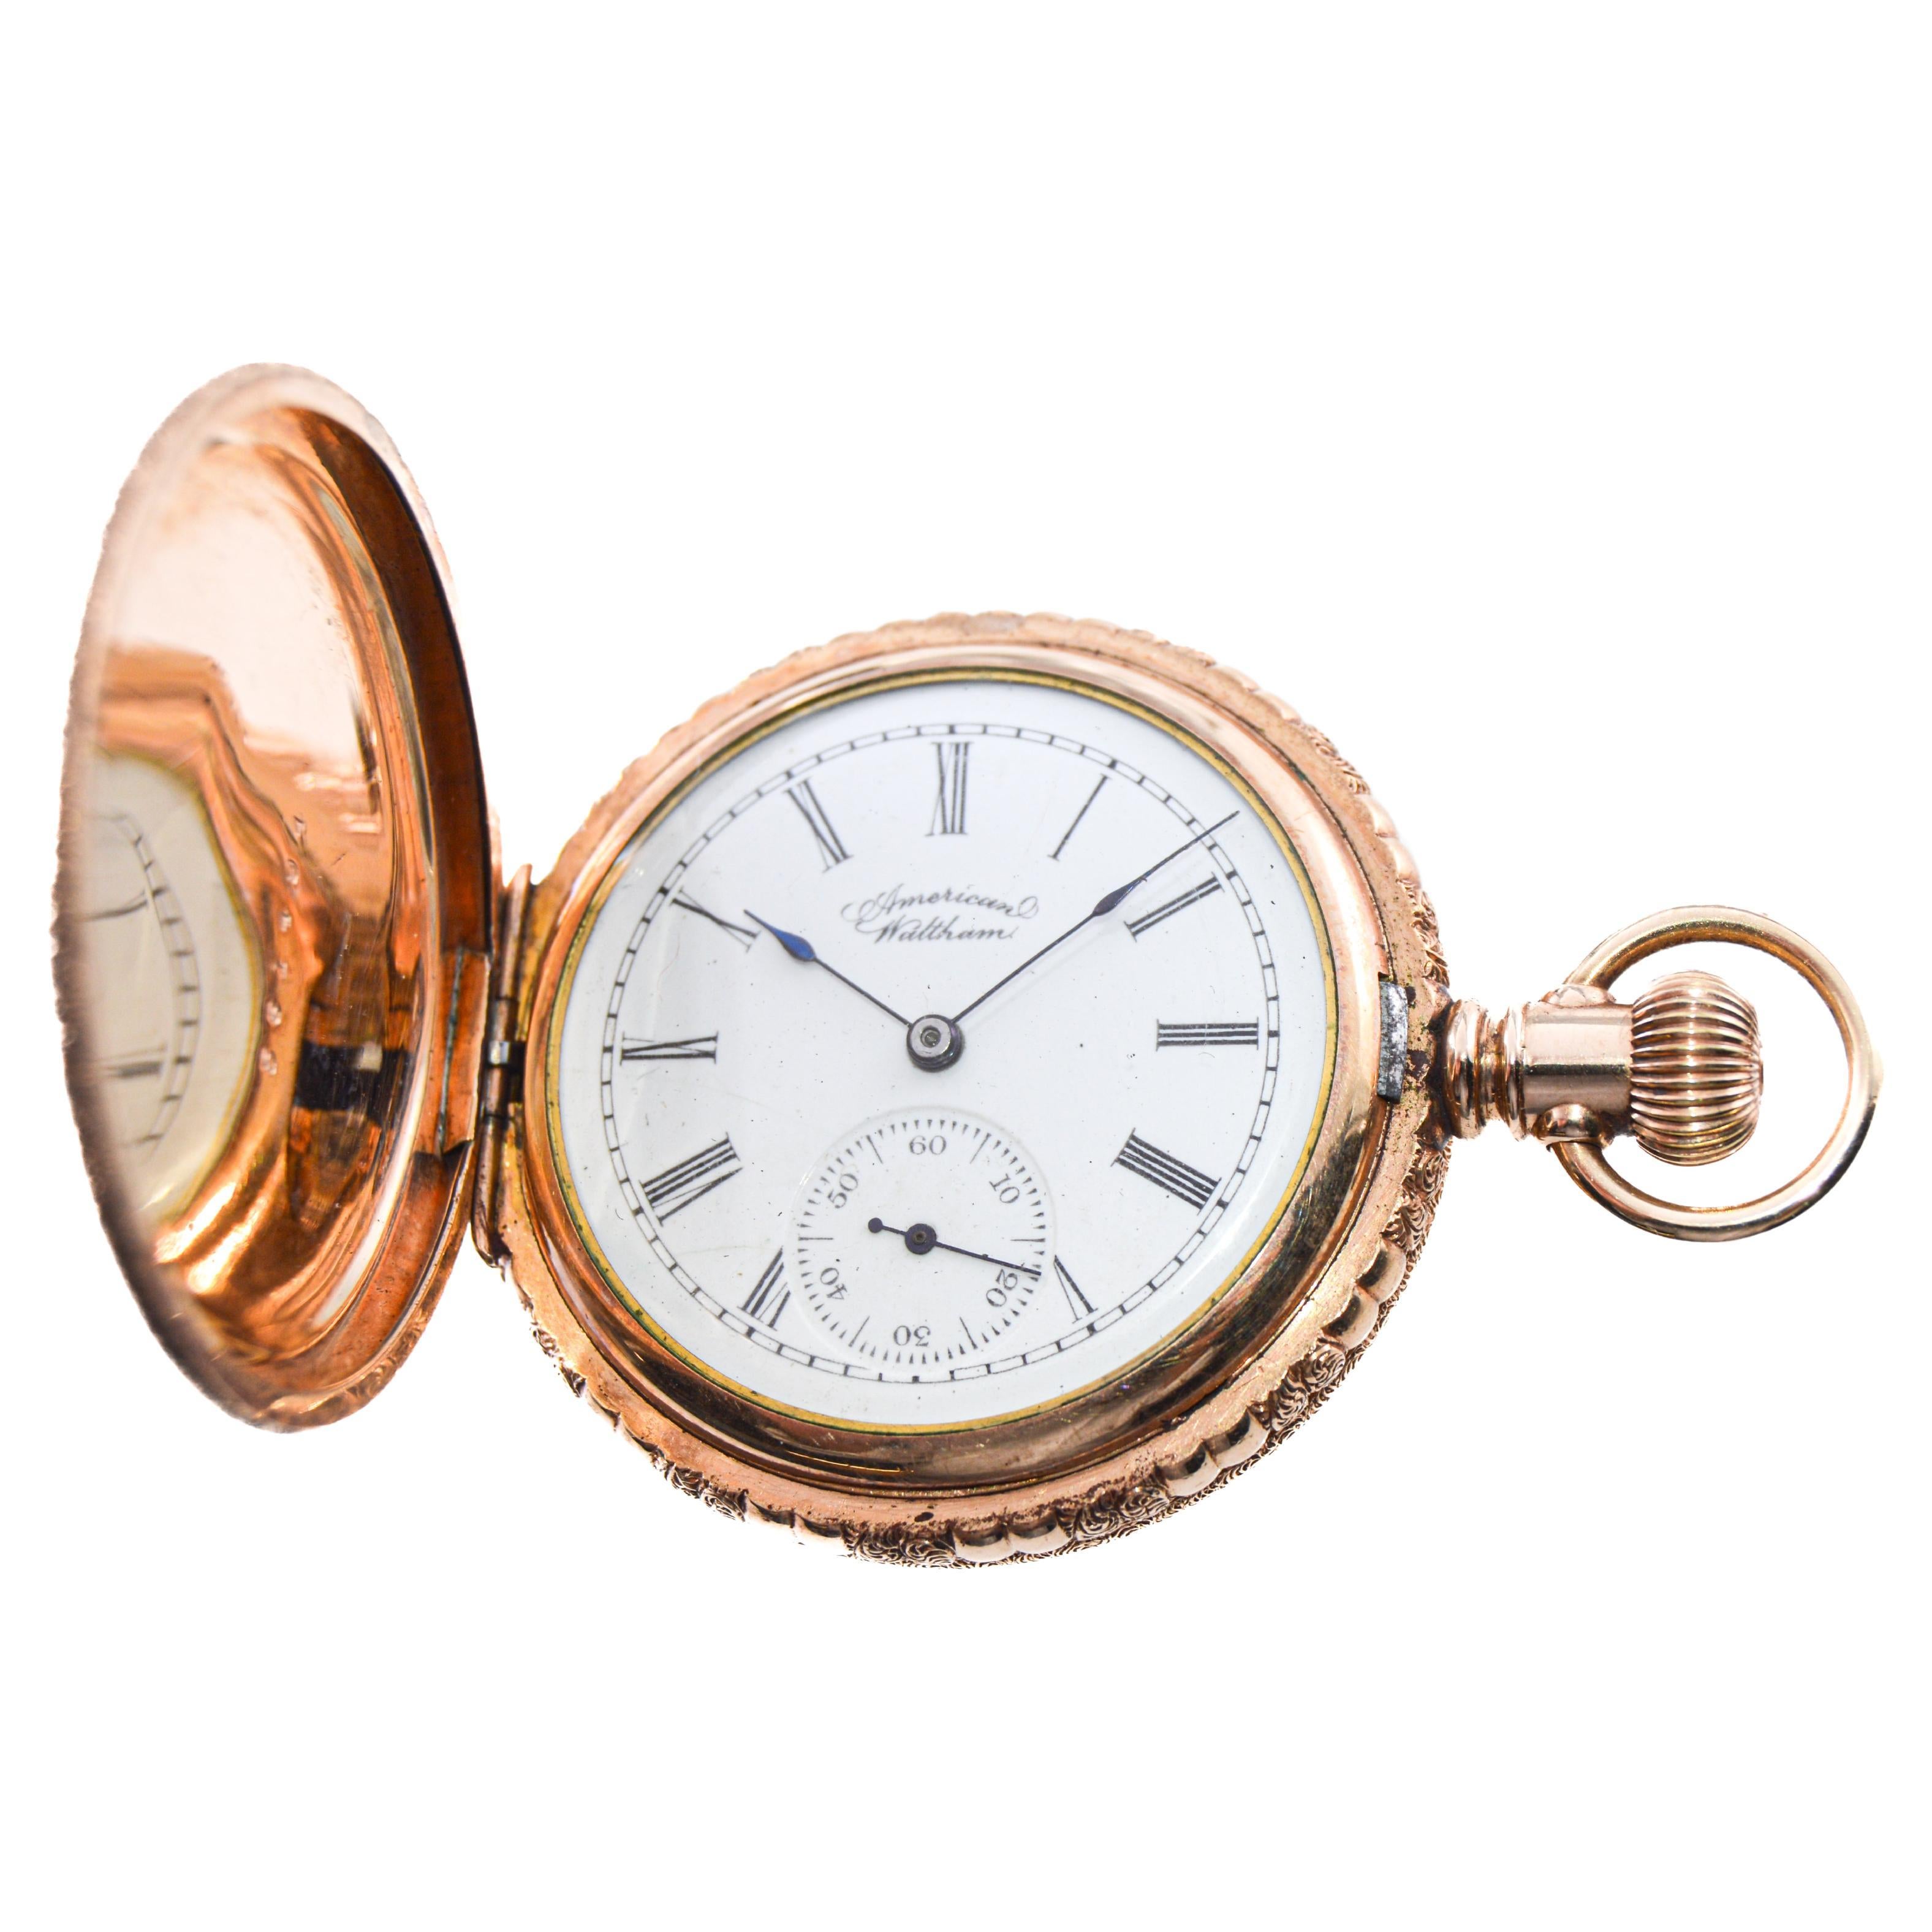 Elgin Gold Filled Pocket Watch From 1891 with Original Kiln Fired Enamel Dial 